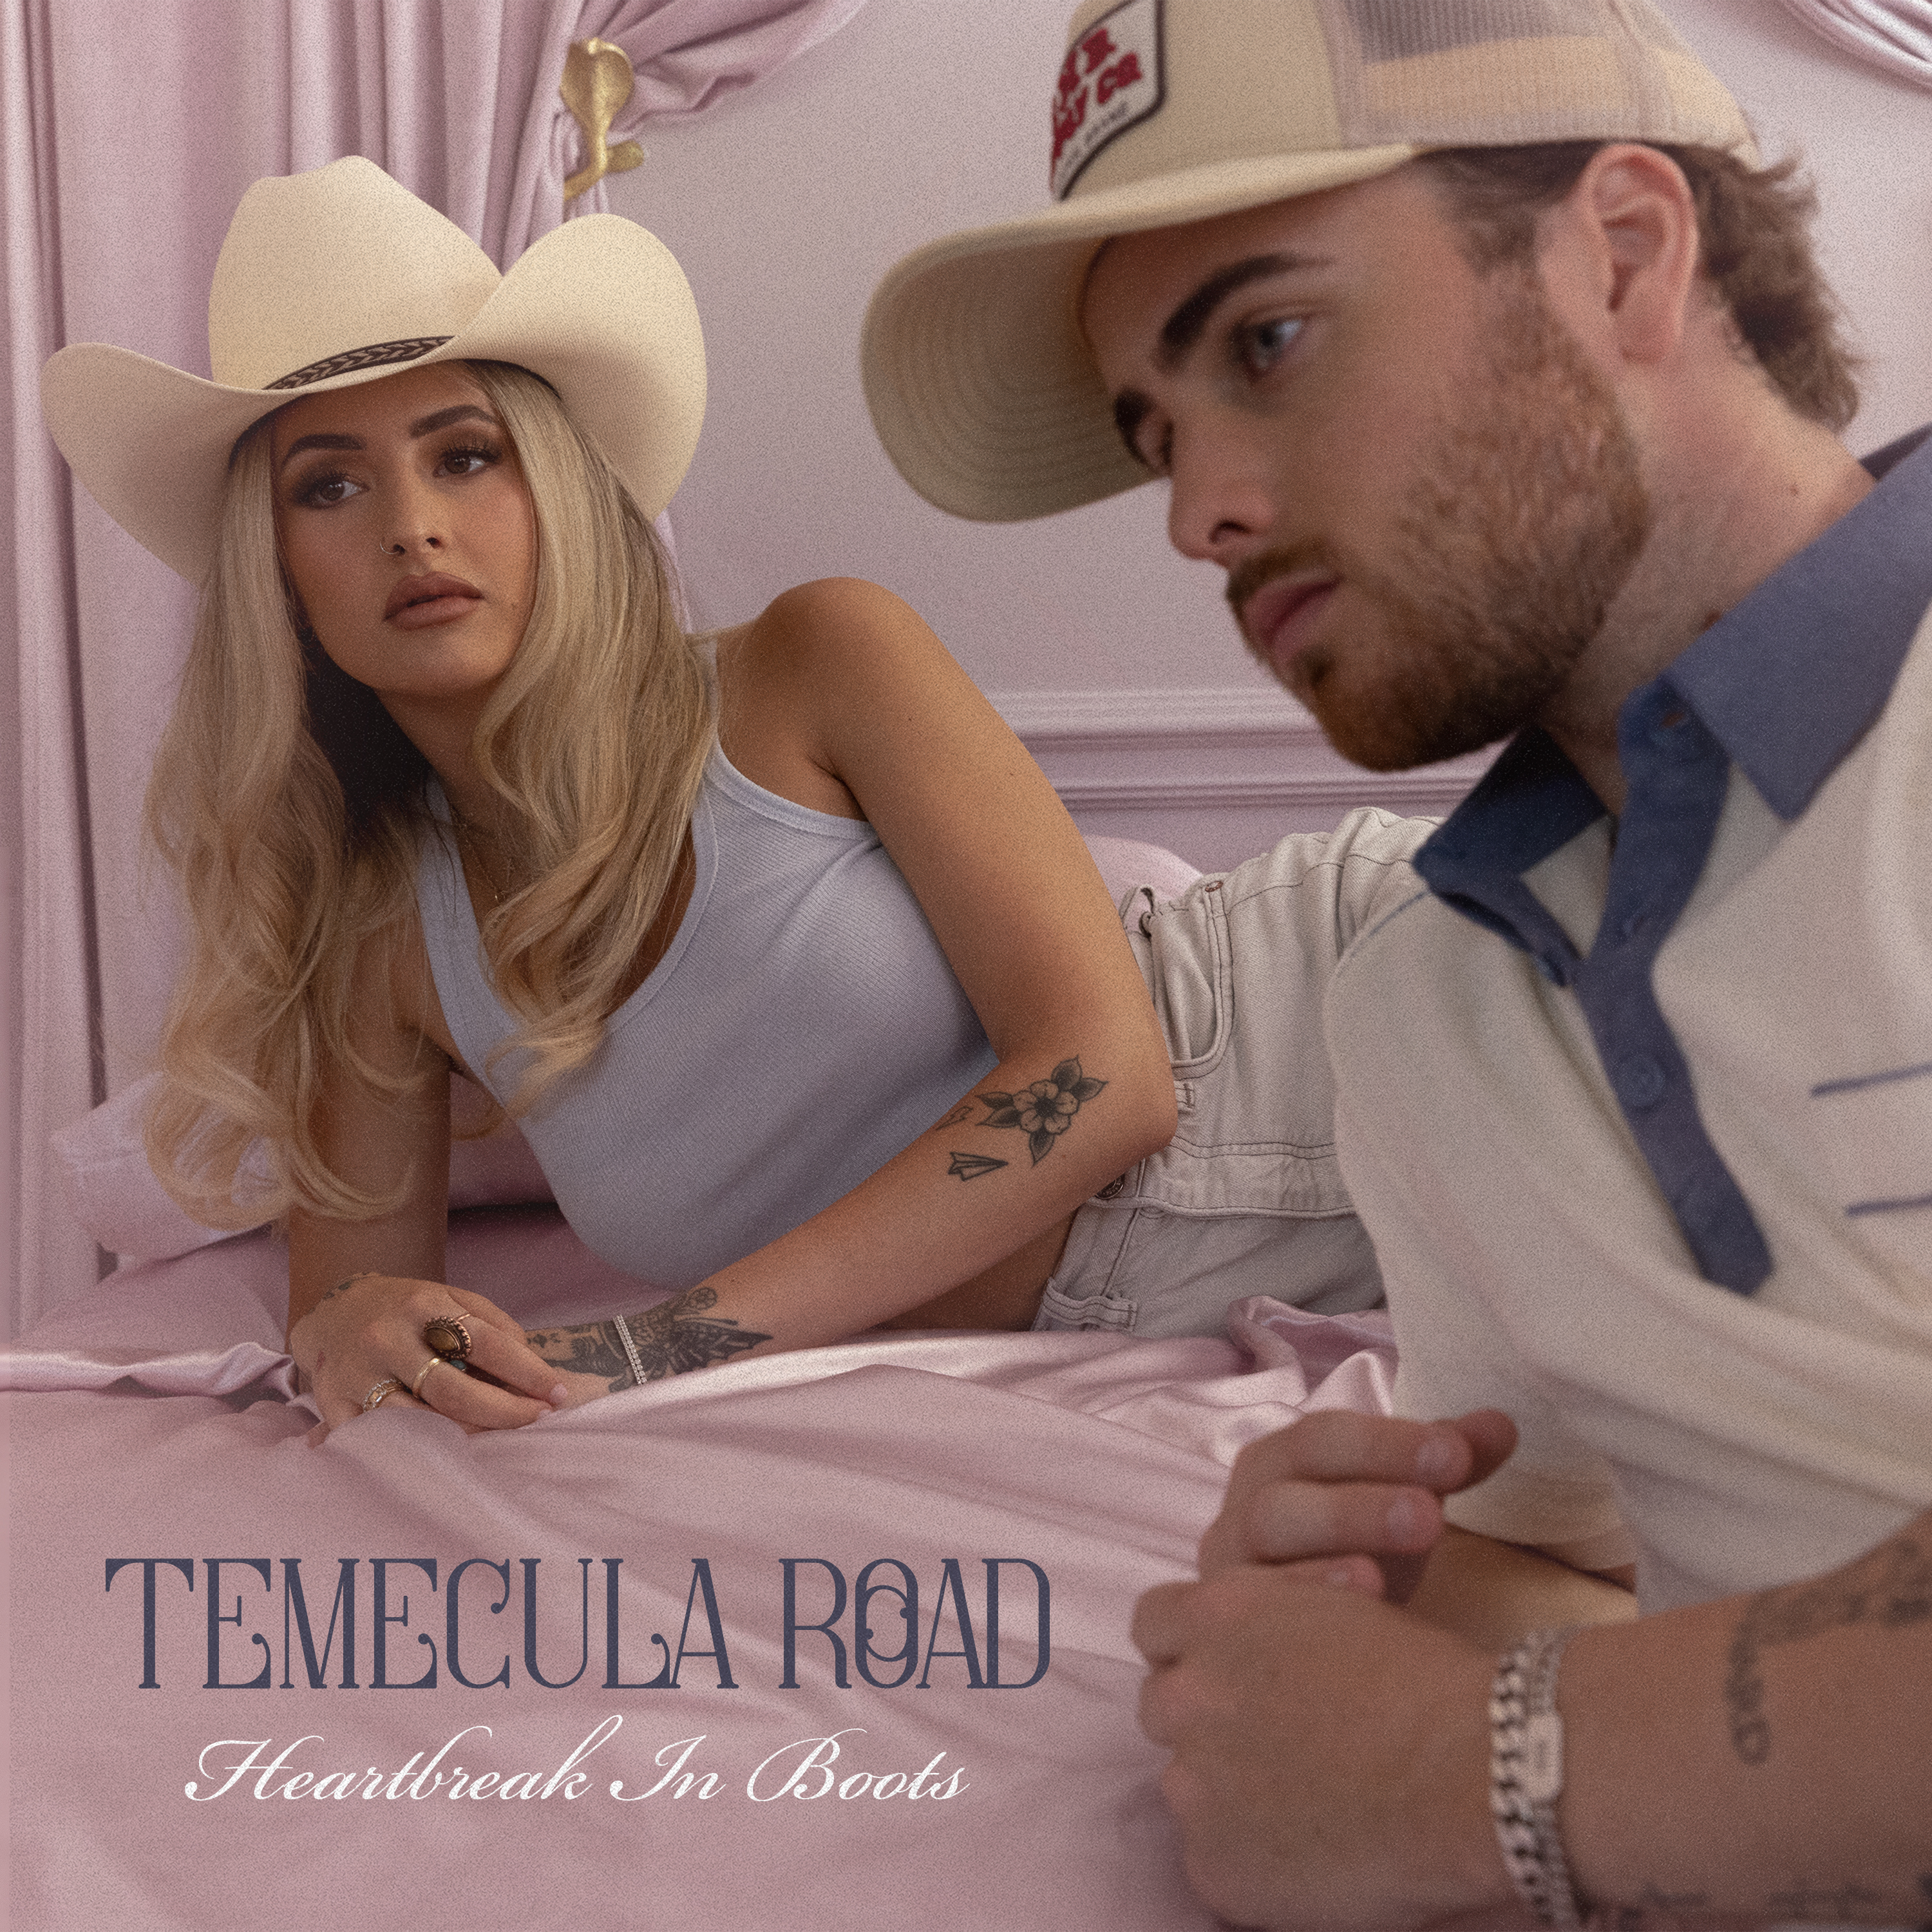 TEMECULA ROAD RELEASES FIRST TRACK AS A DUO, “HEARTBREAK IN BOOTS”